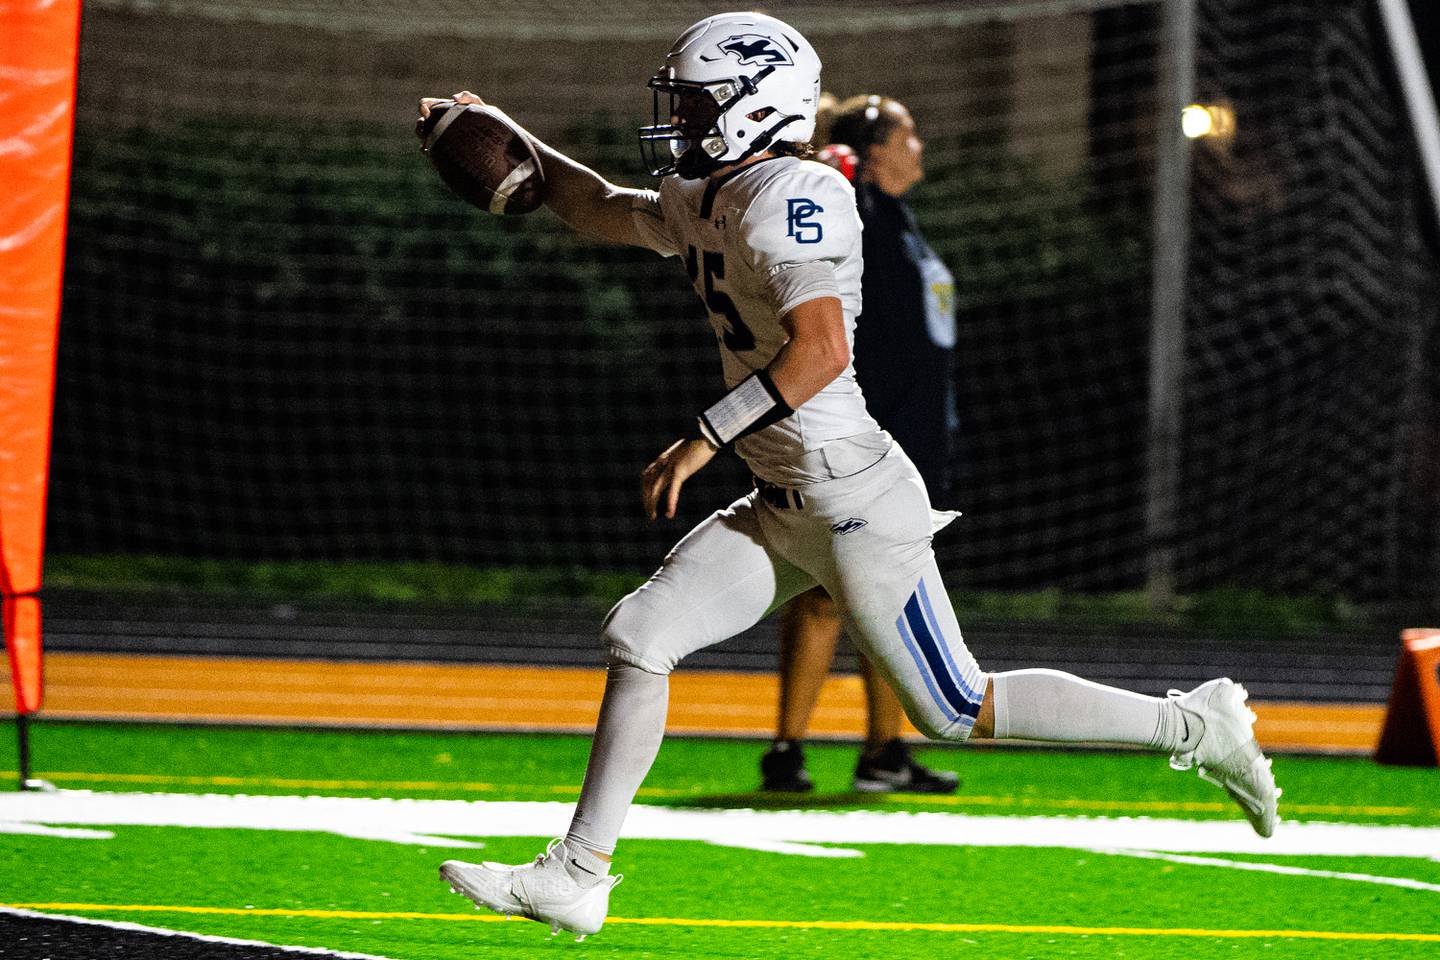 Plainfield South's Cody Hogan runs in a touchdown during a game against Joliet West on Friday Sept. 29, 2023 at Joliet West High School in Joliet